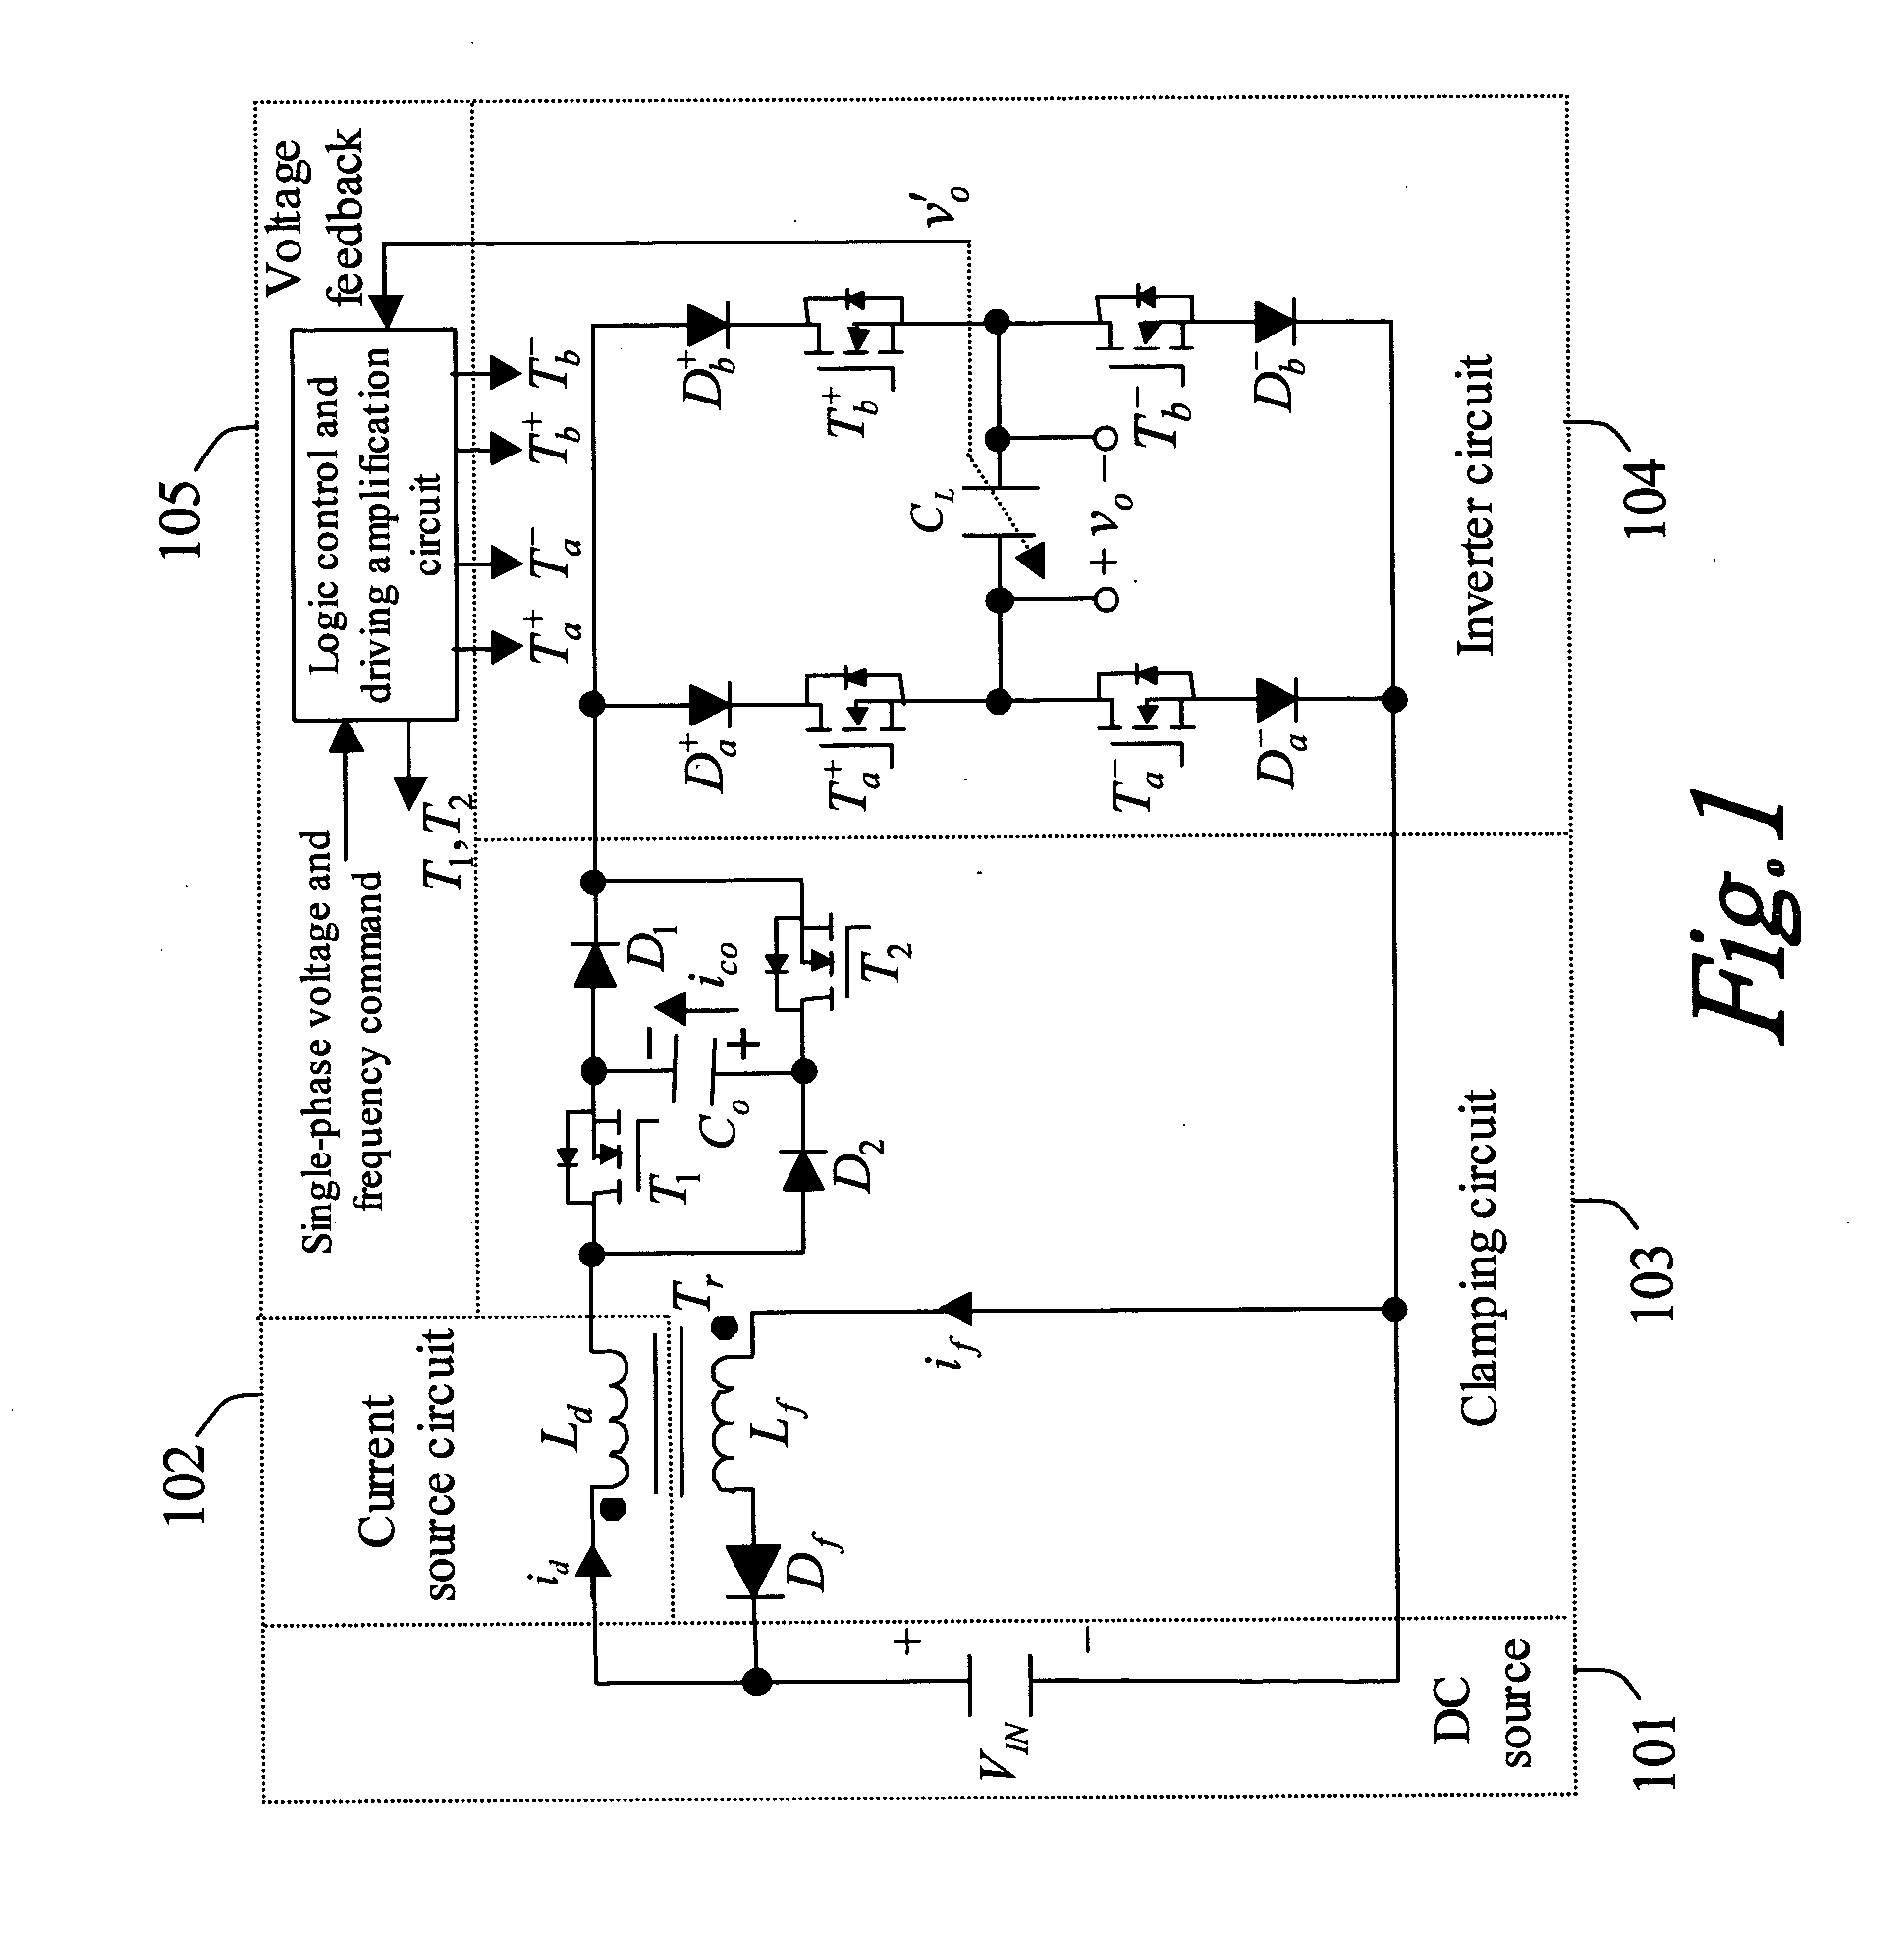 Current source sine wave voltage driving circuit via voltage-clamping and soft-switching techniques